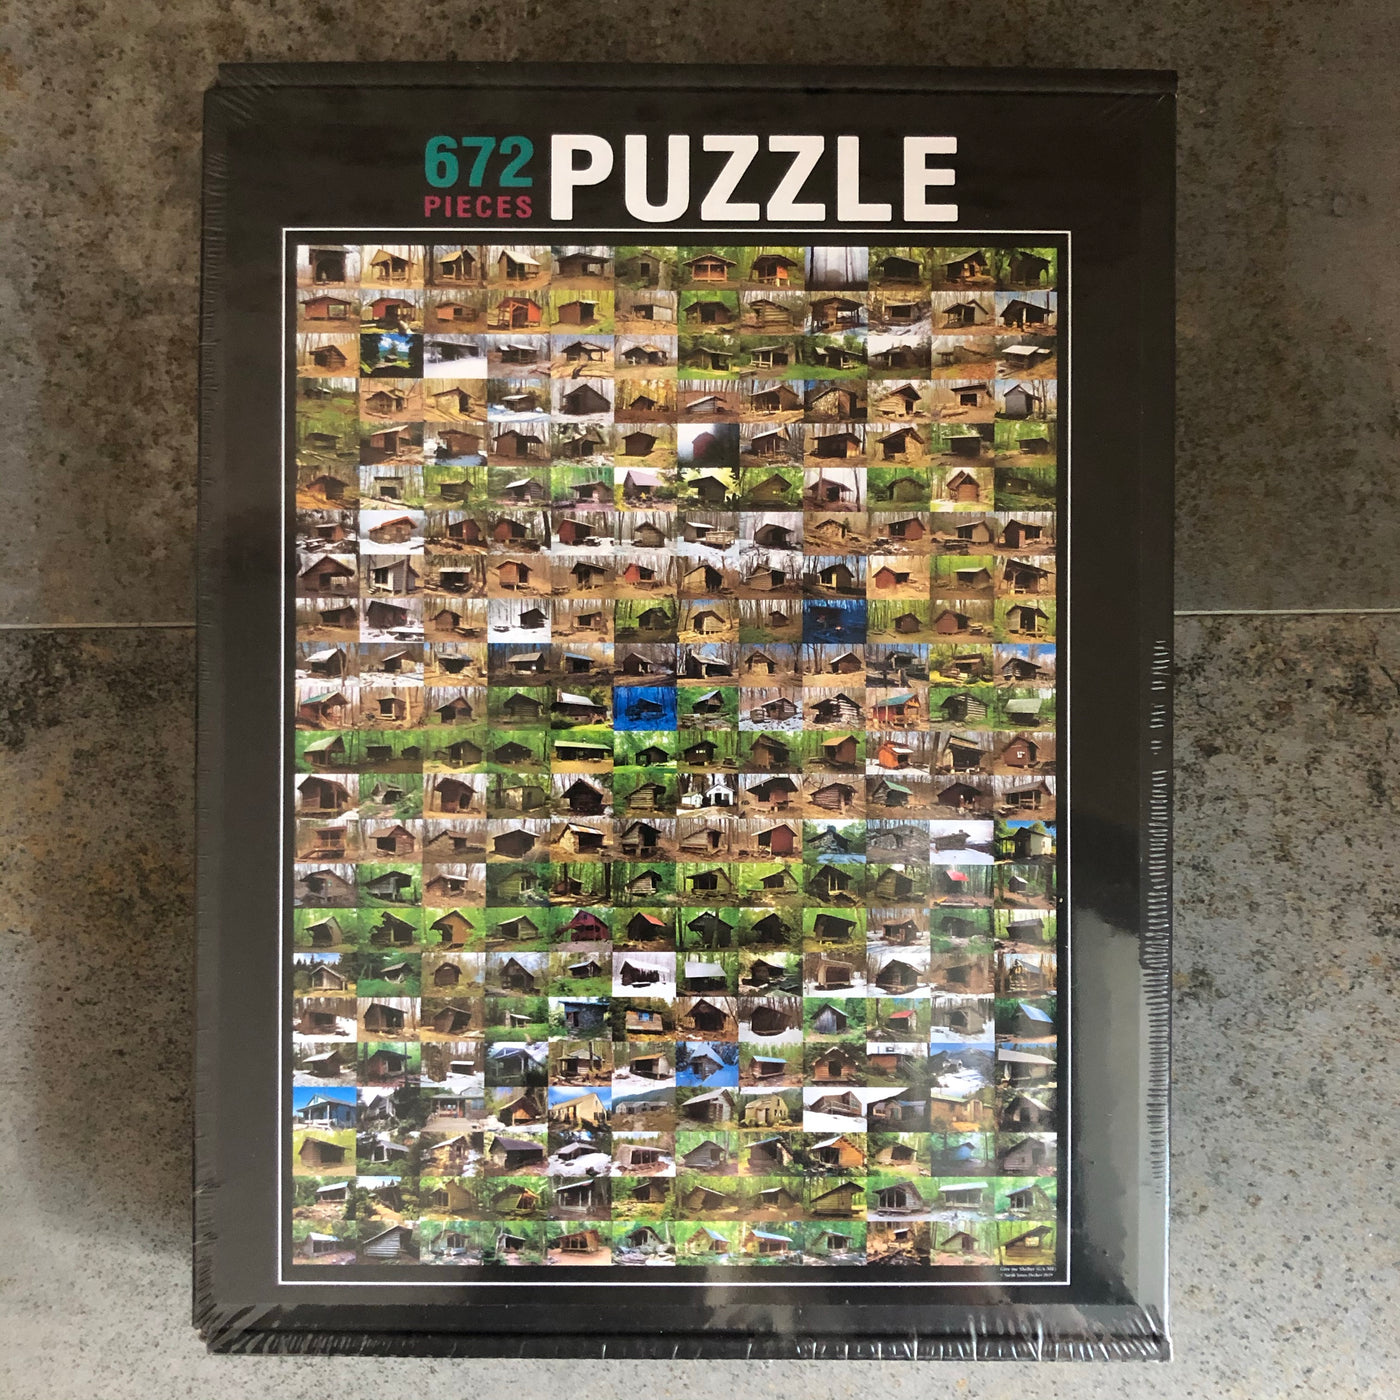 Give Me Shelter on the AT Puzzle by Sarah Jones Decker, 672 Pieces